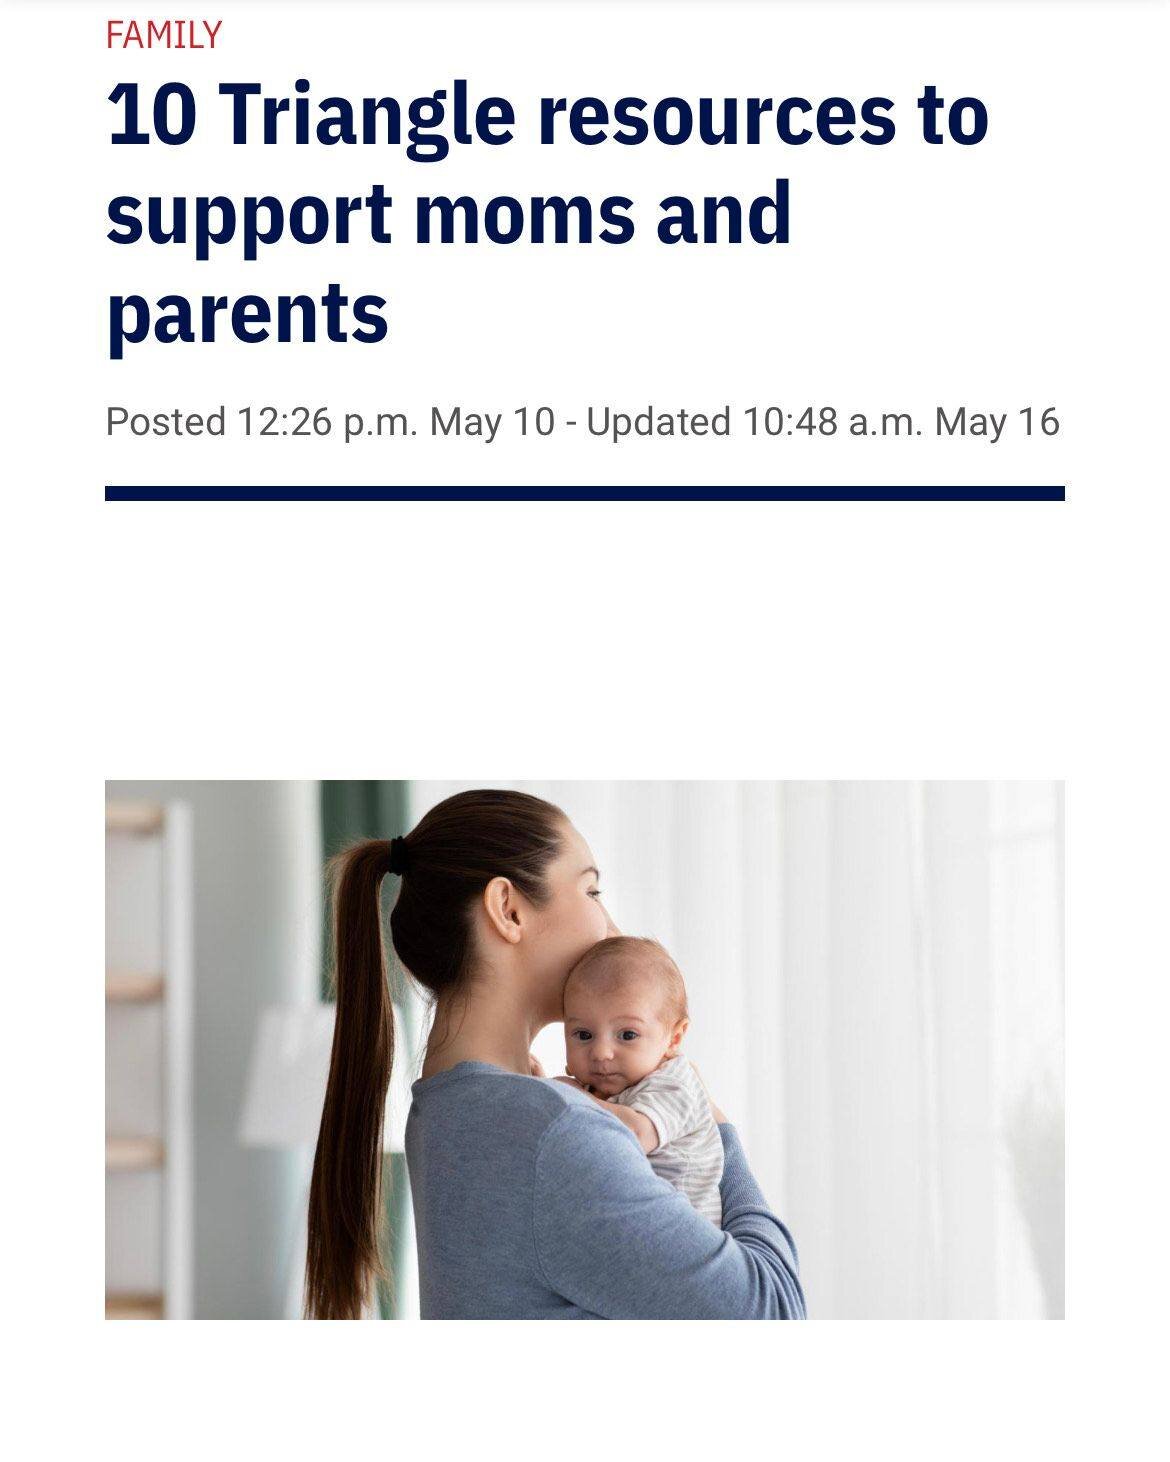 Check out @wral's list of 10 Triangle Resources to Support Moms and Families. Rosenberg Perinatal is honored to be listed among such stellar perinatal supports in the area!
https://www.wral.com/10-triangle-resources-to-support-moms-and-parents/208533